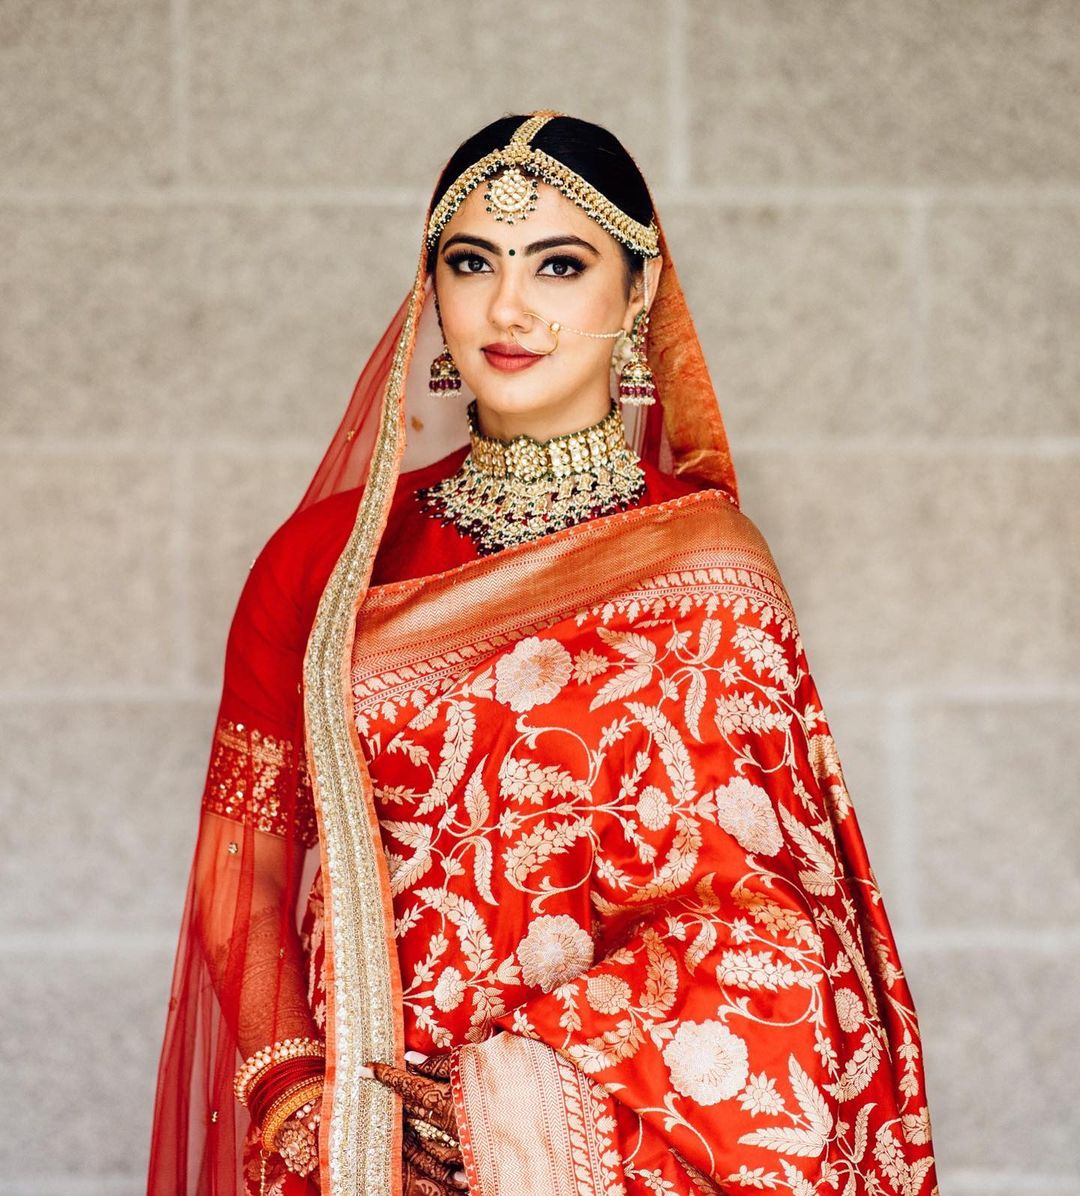 Sabyasachi Red Silk Saree Look Beautiful Bridal Saree Look Spotted On Celebrities And Real Brides